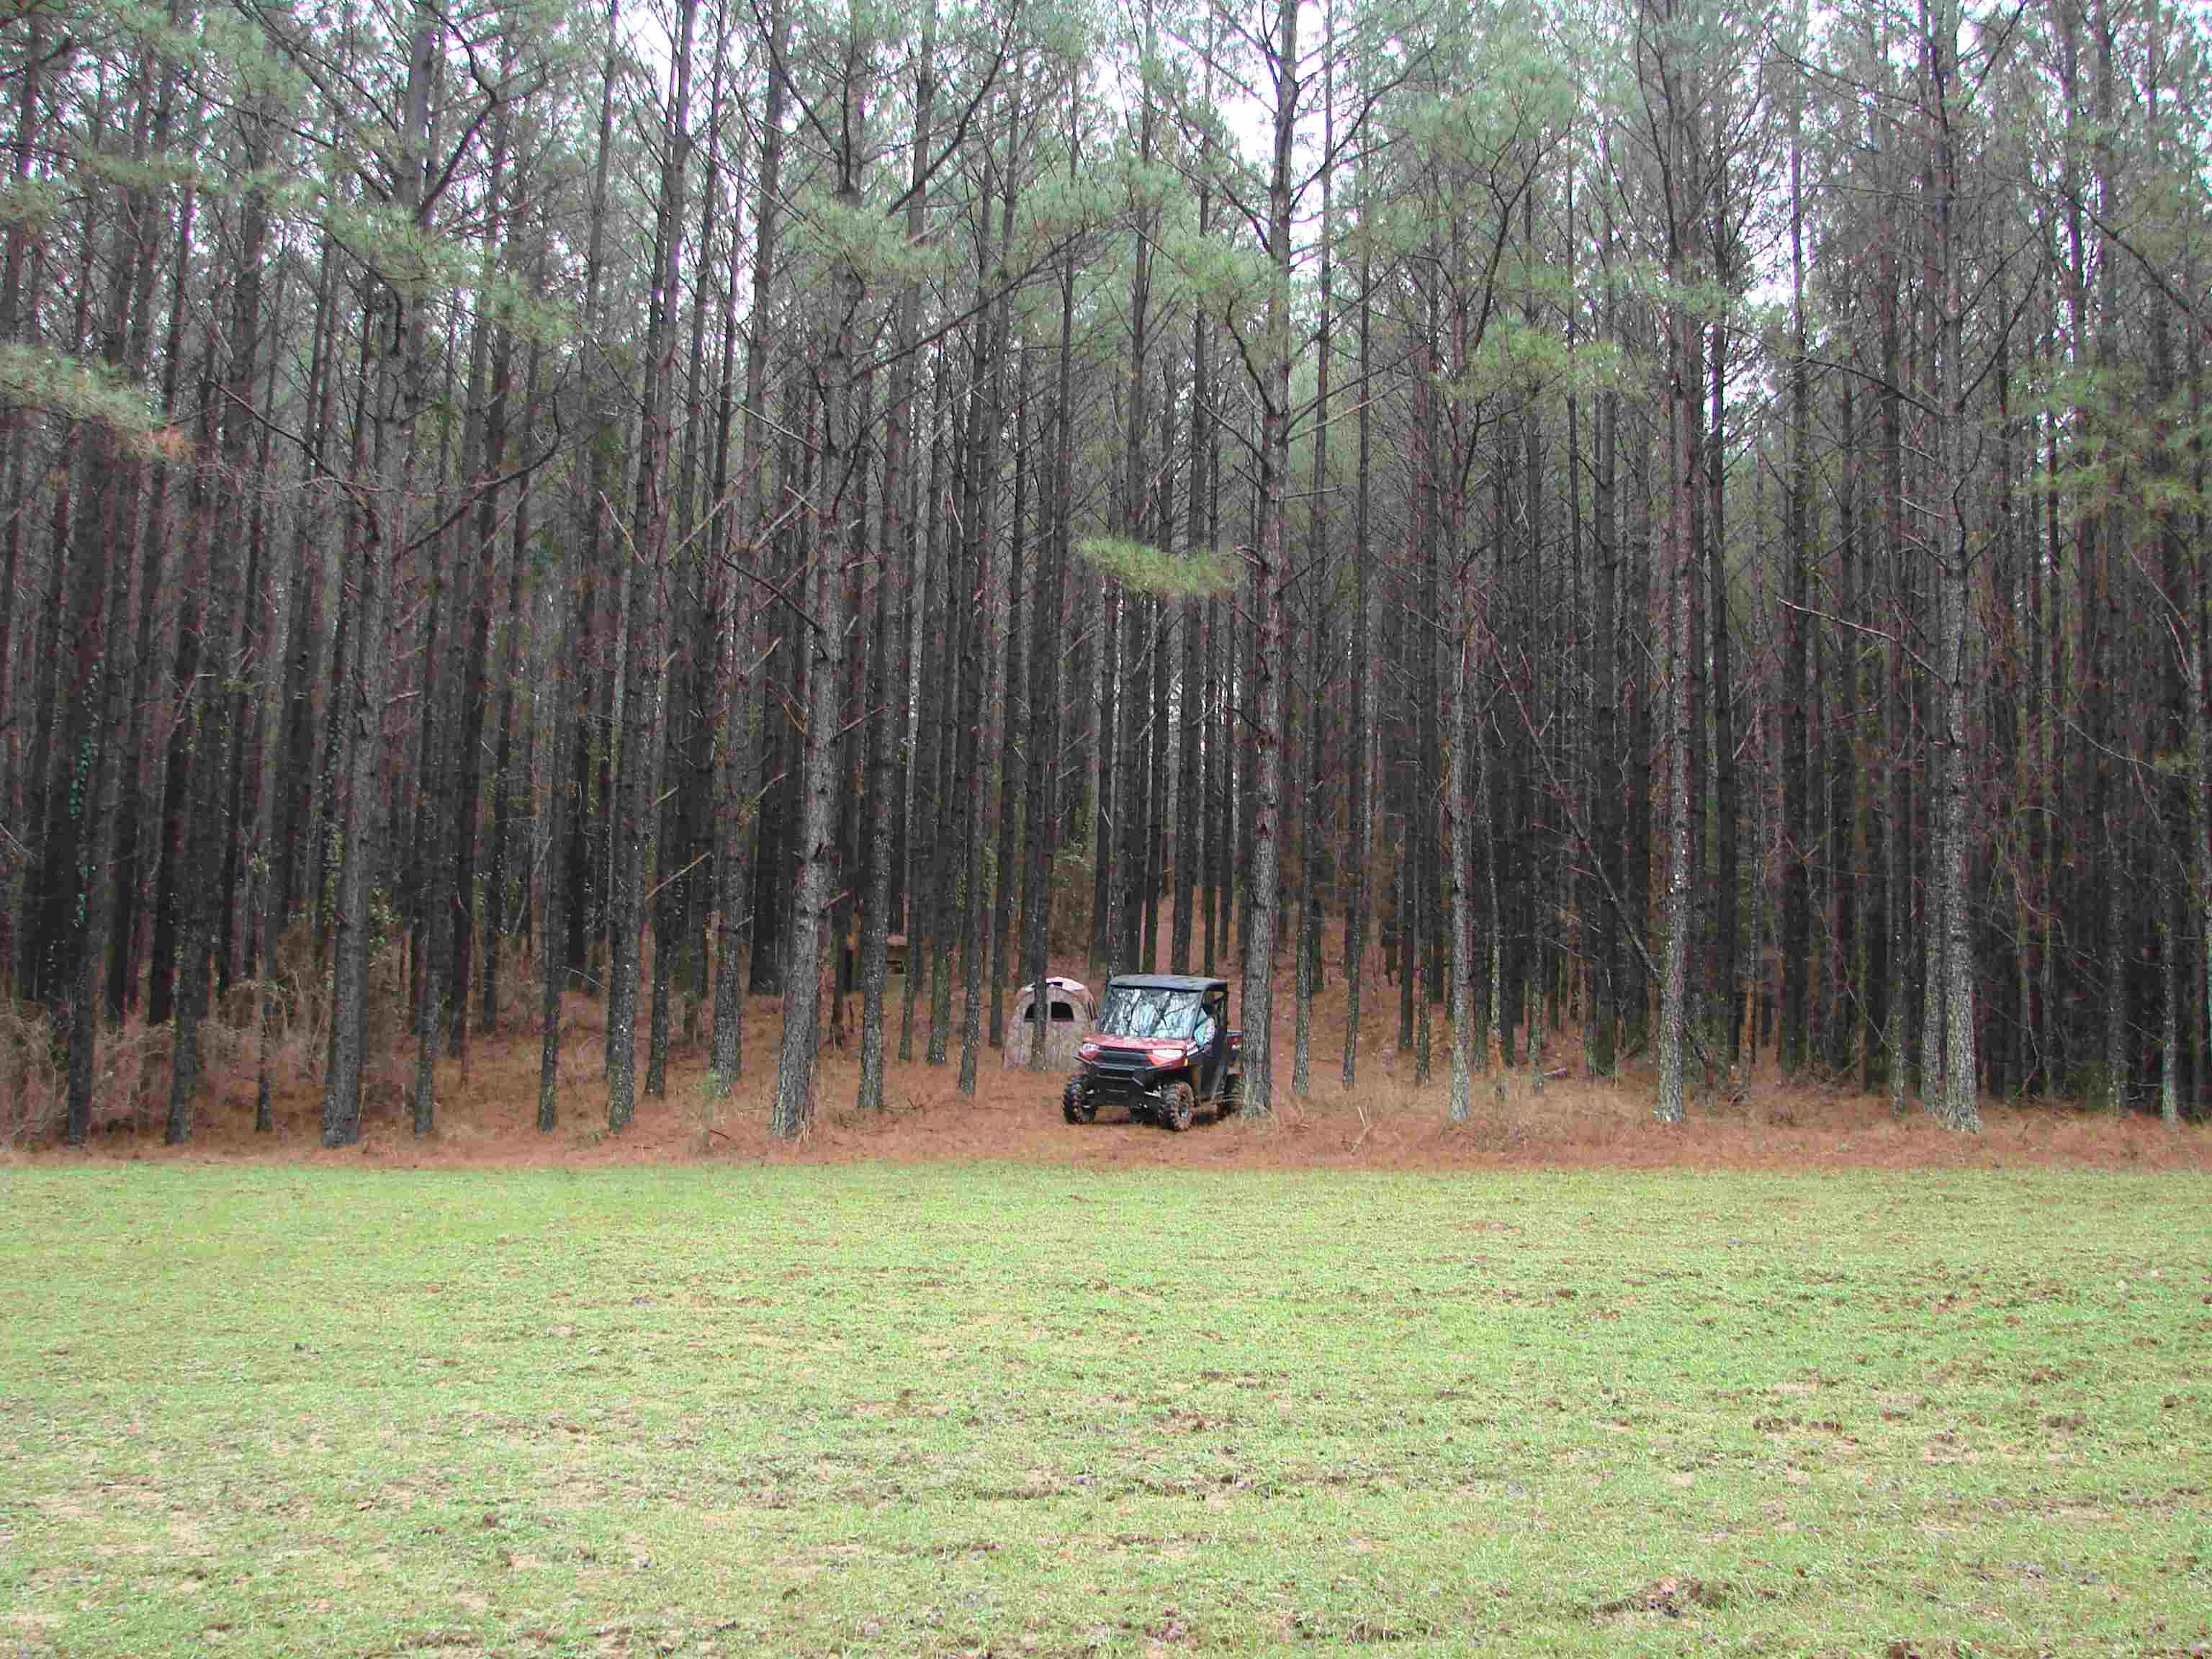 A view of the food plot and the mature timber